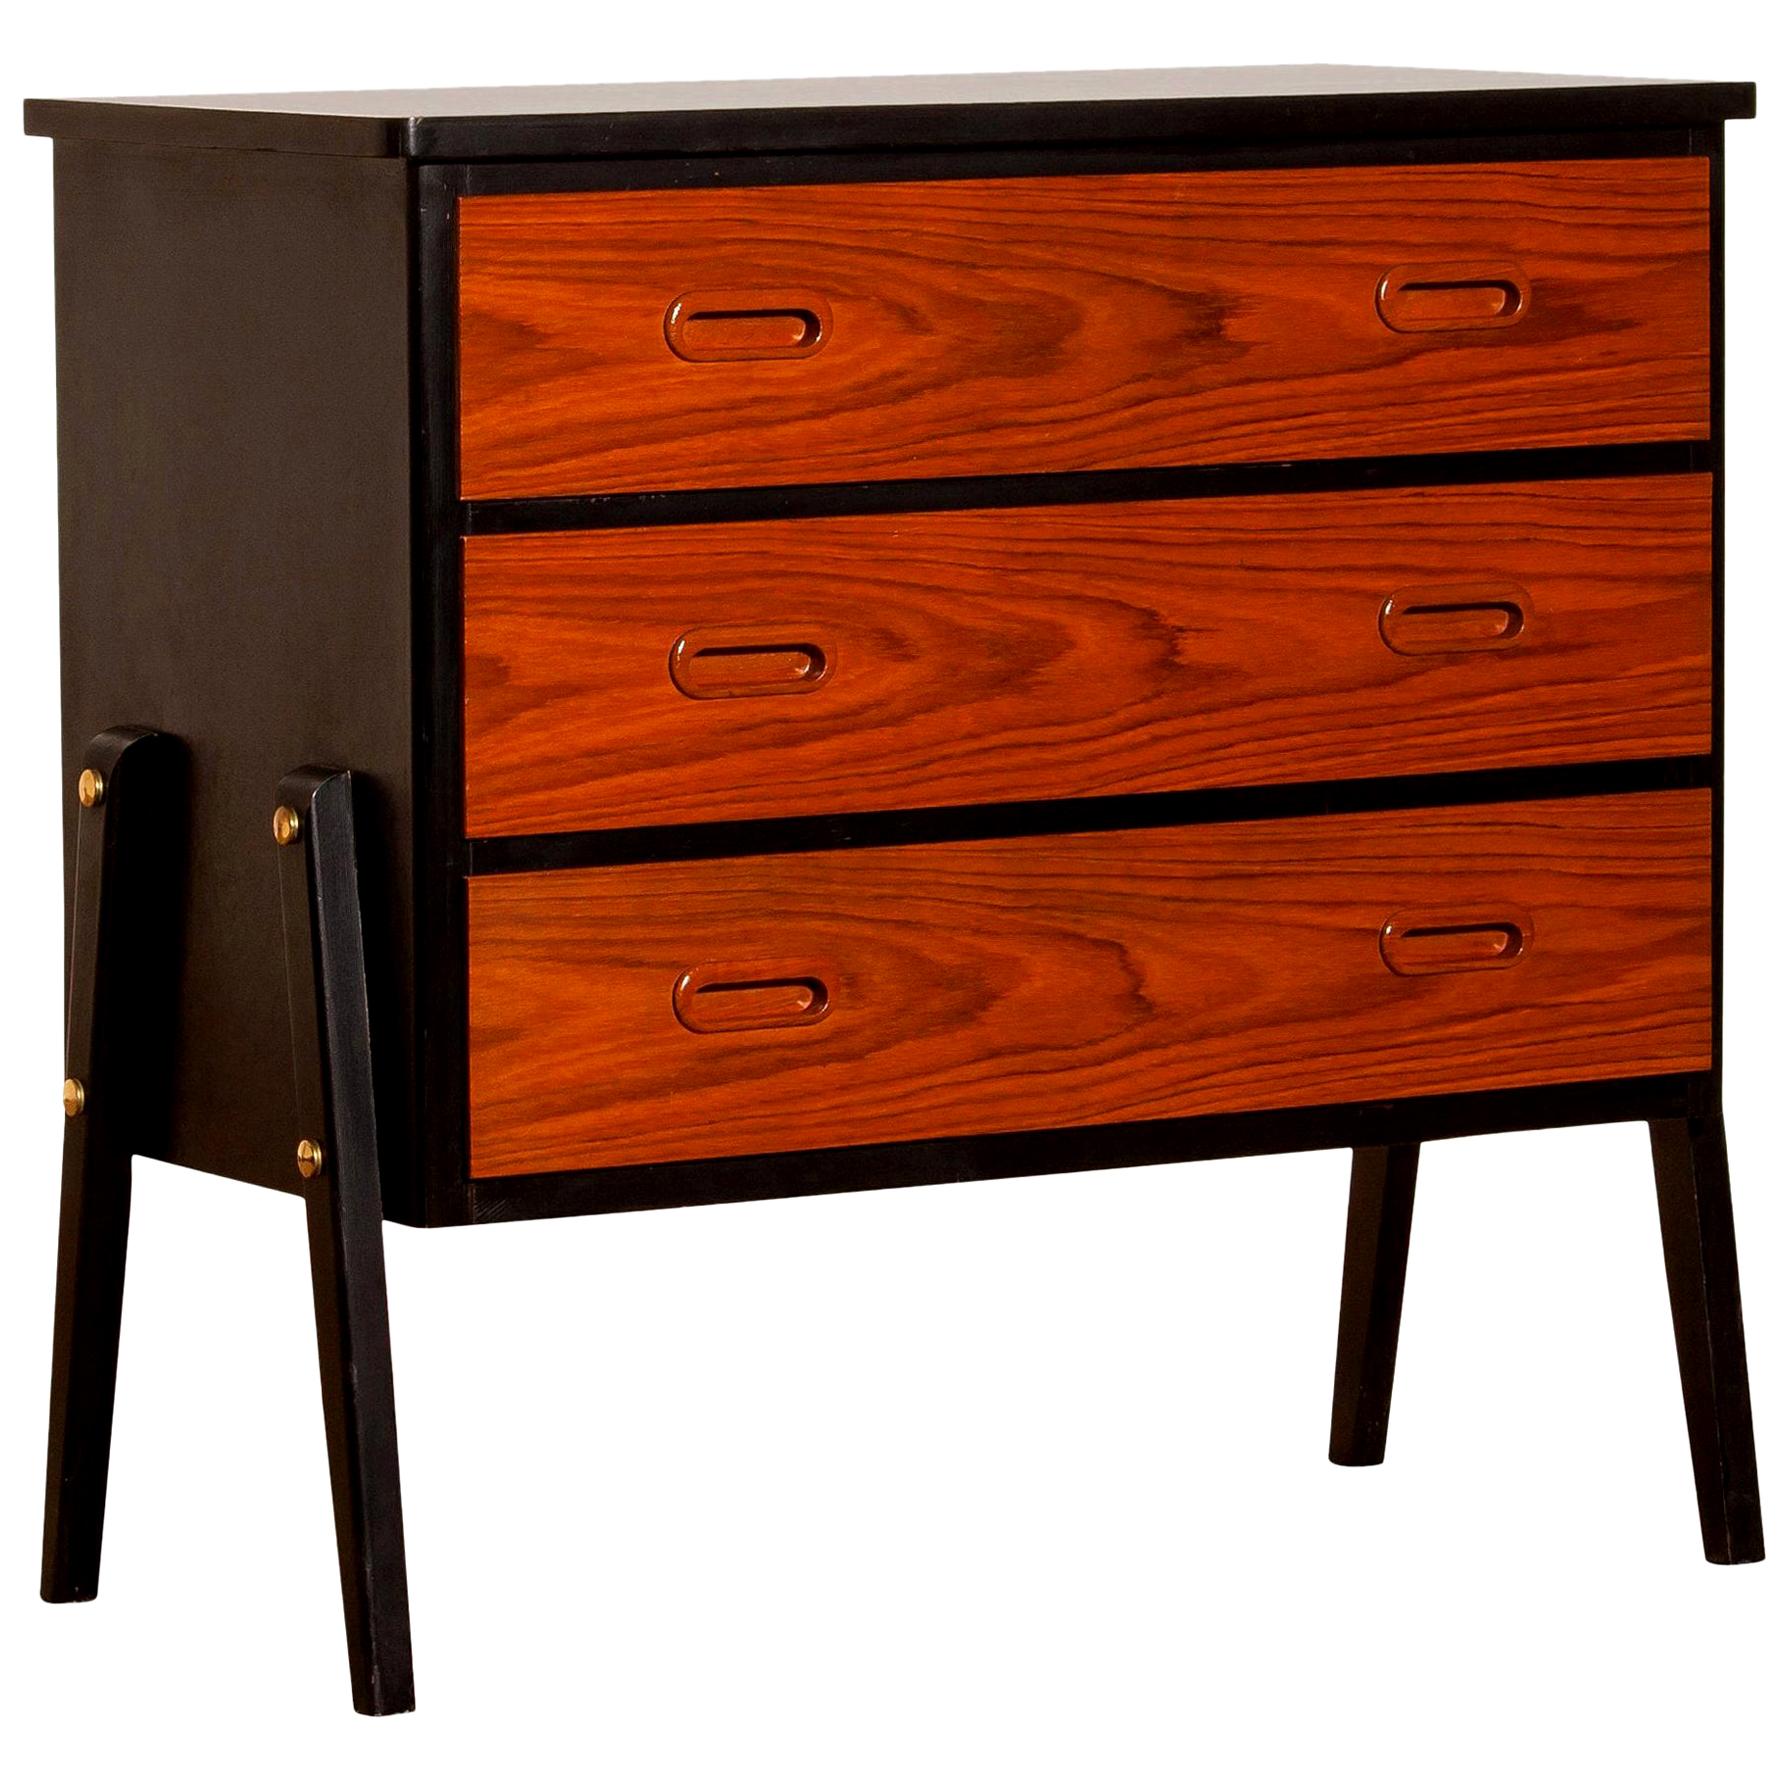 Beautiful small chest of drawers made by Gyllensvaans Möbler, Sweden (marked).
This chest of drawers is made of teak and has three drawers.
It looks great with the black details and is in a very nice condition.
Period, 1950s.
Dimensions: H 68 cm